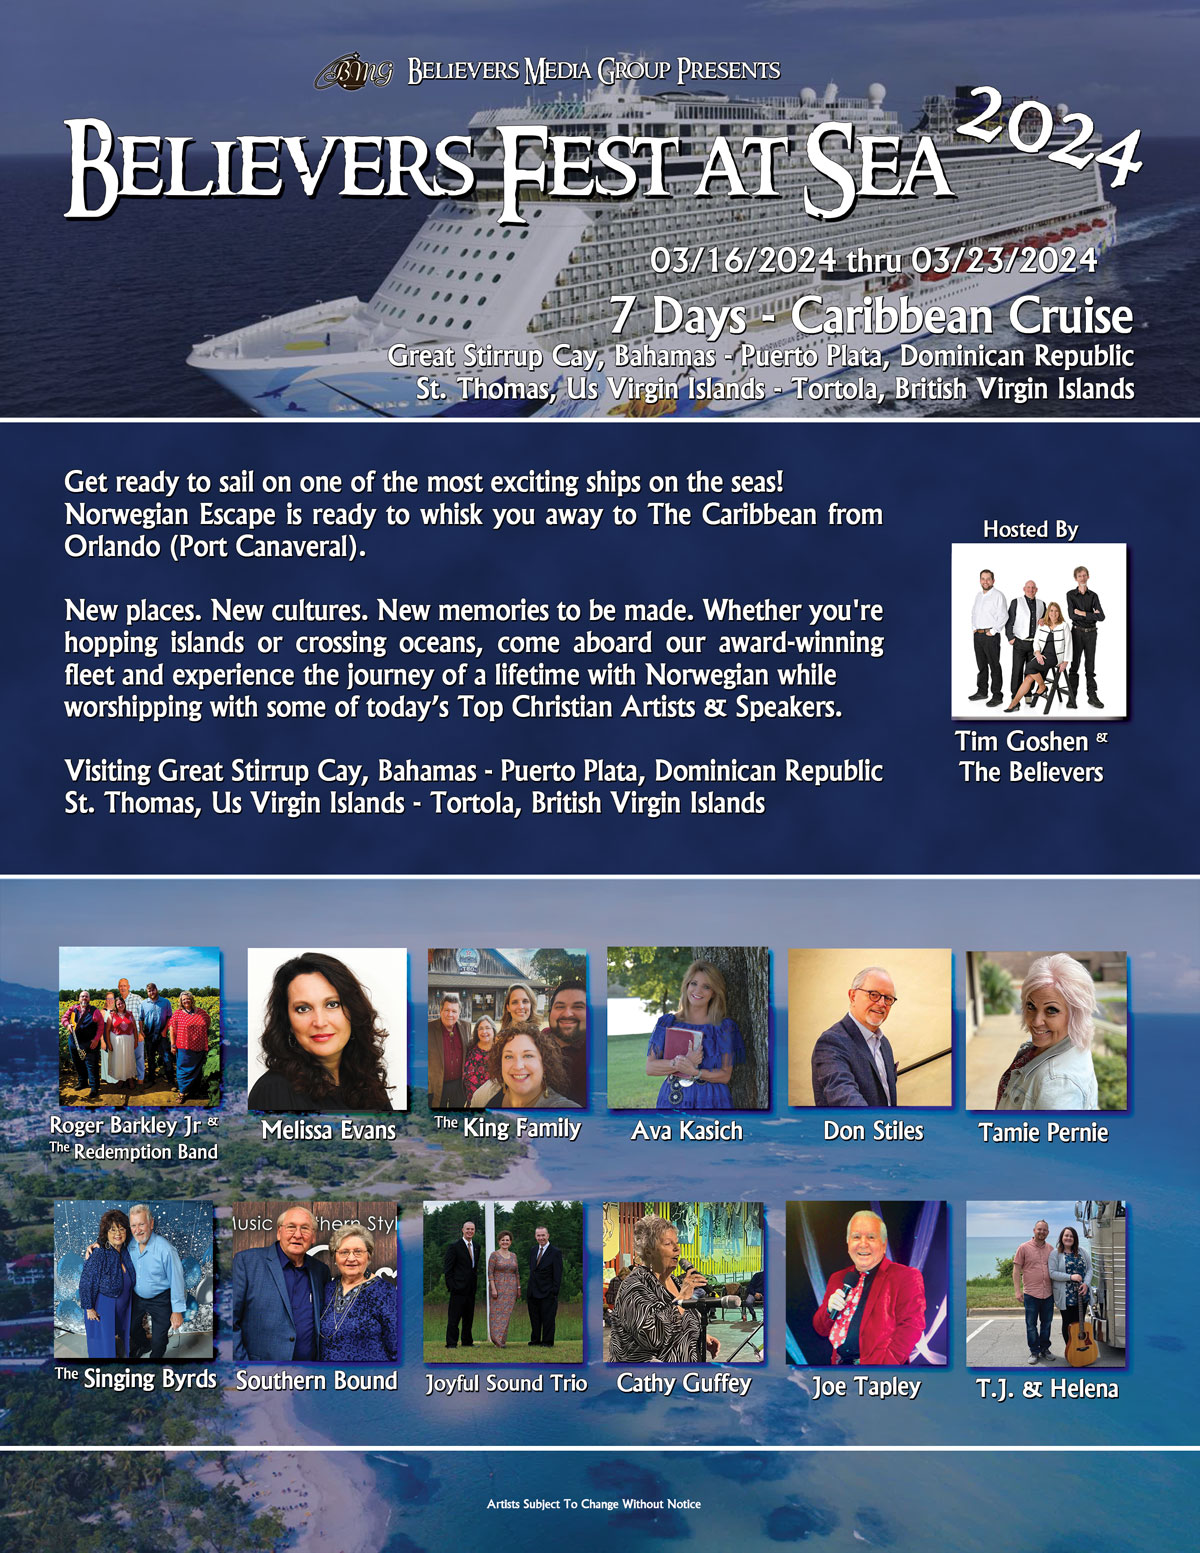 Believers-Fest-at-Sea-2024-front-800